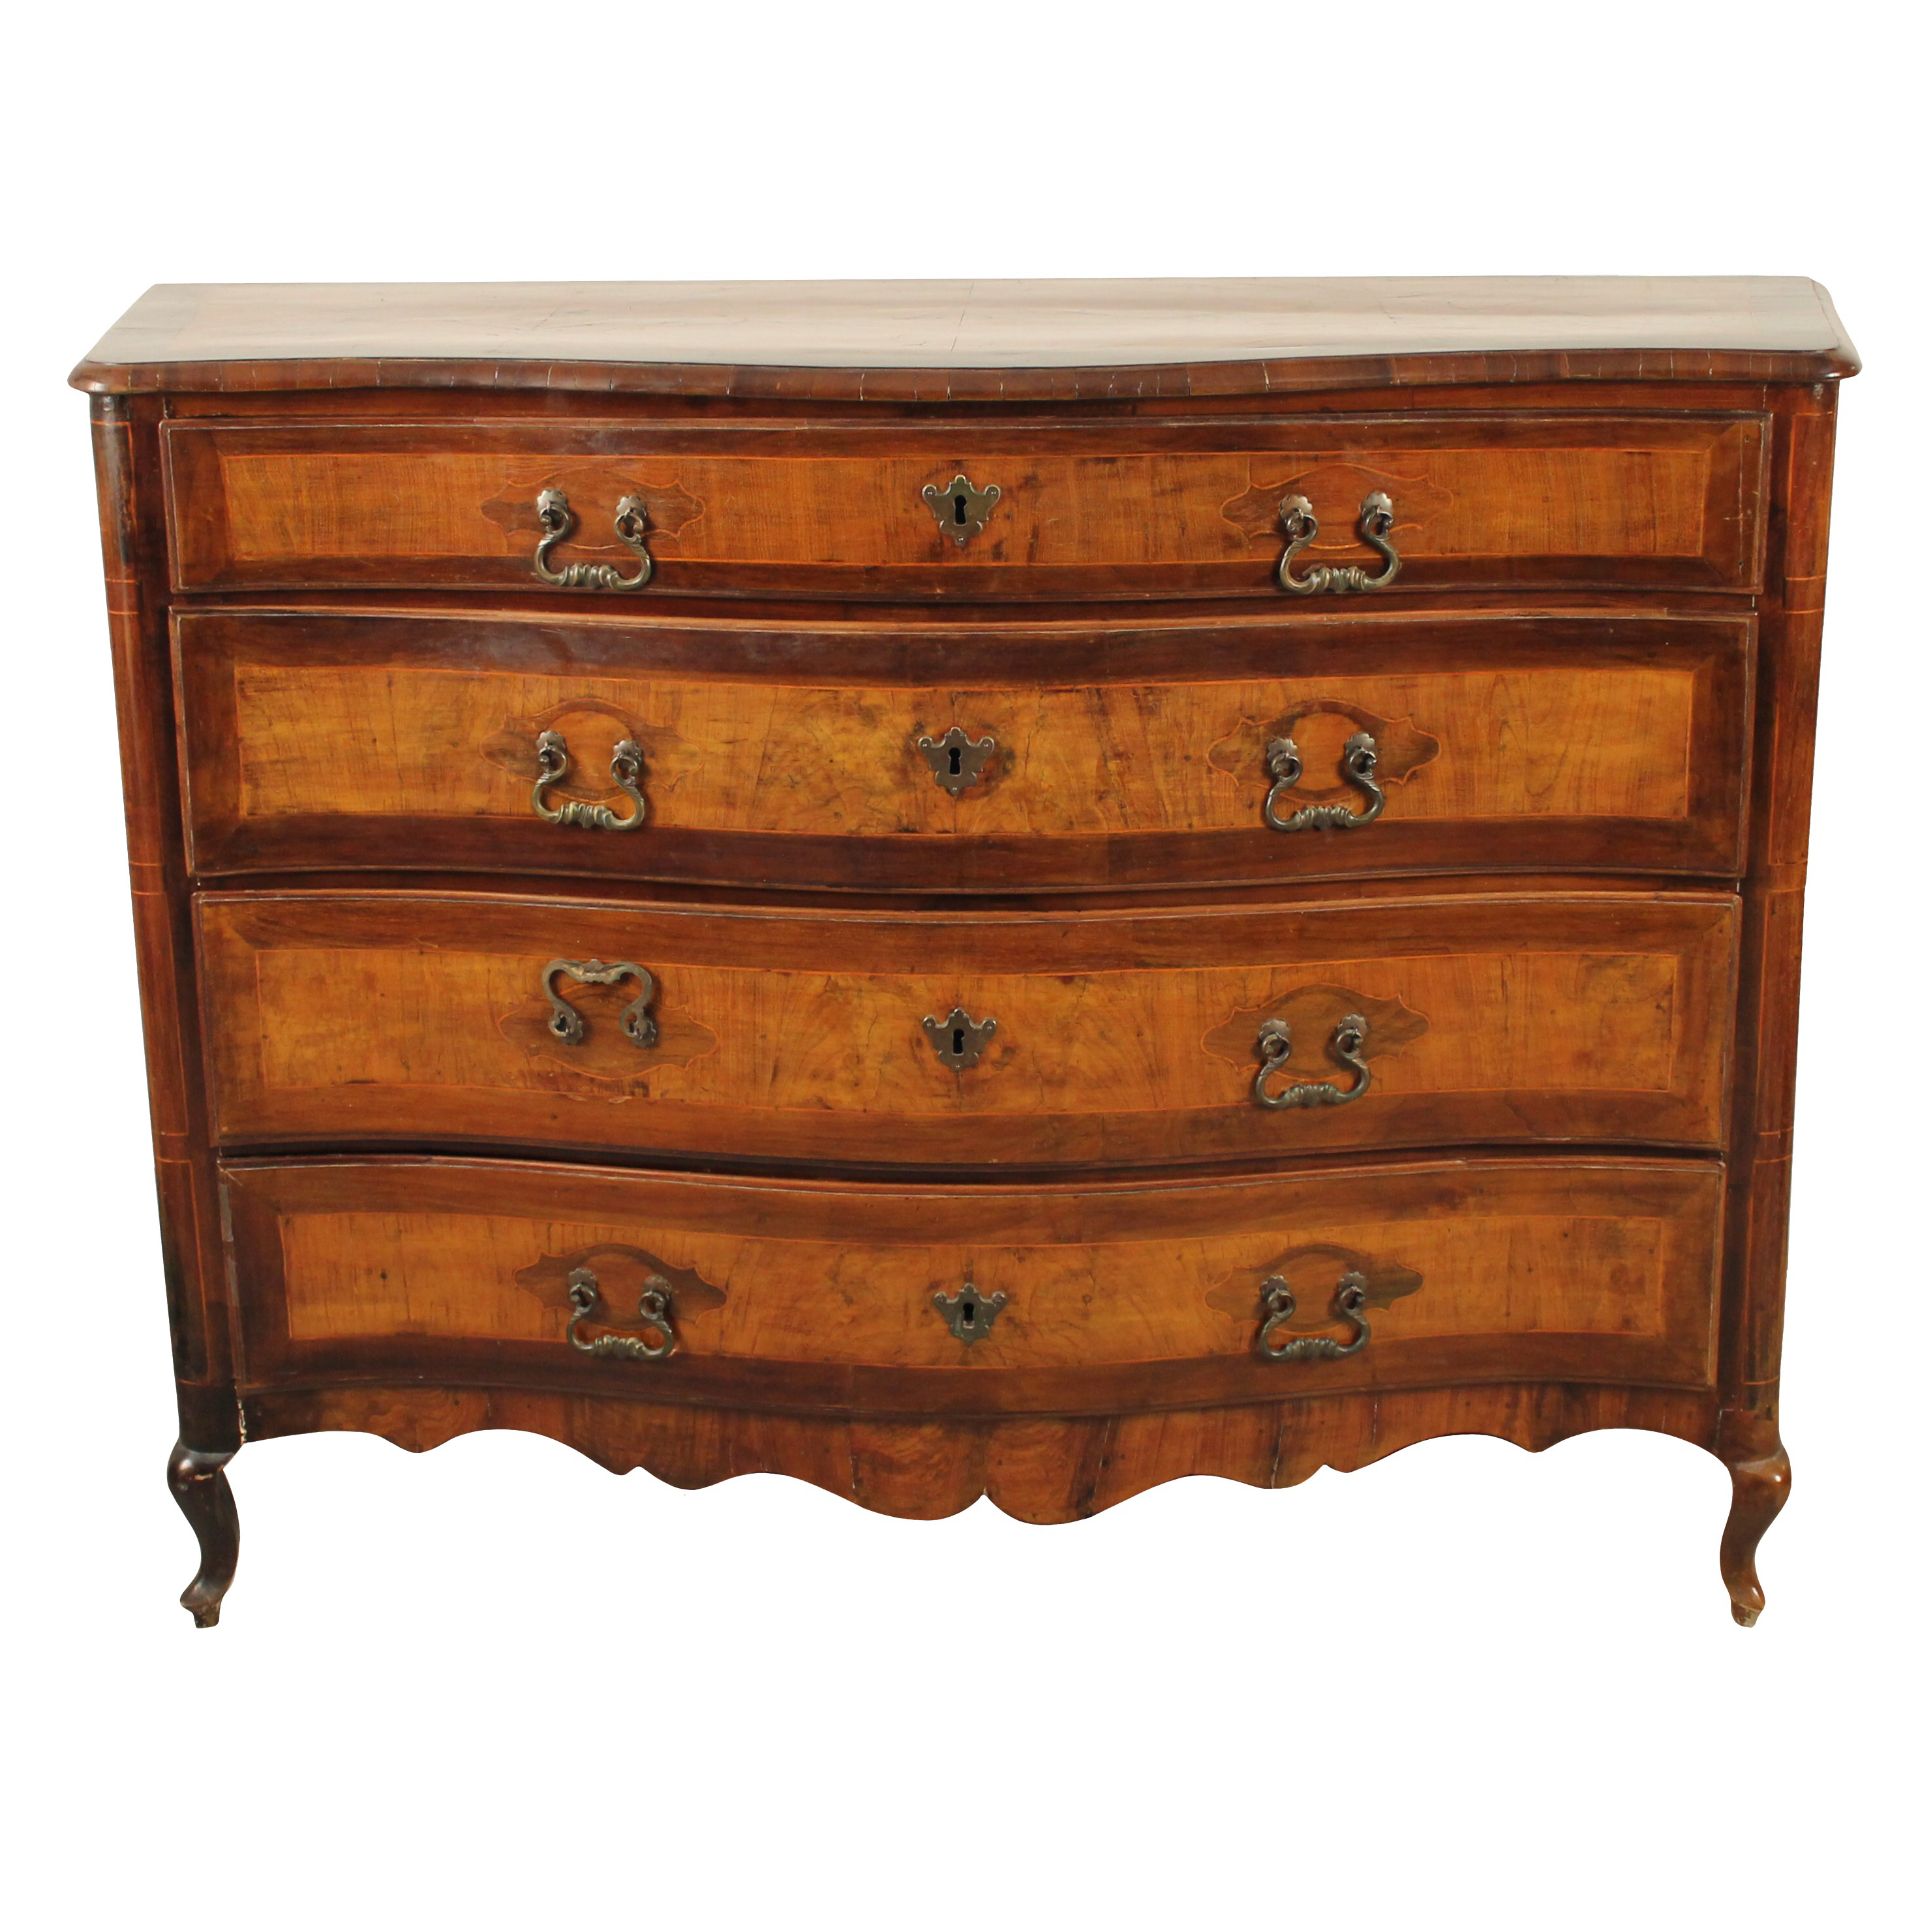 Cassettone a quattro cassetti - Commode with four drawers - Image 2 of 3